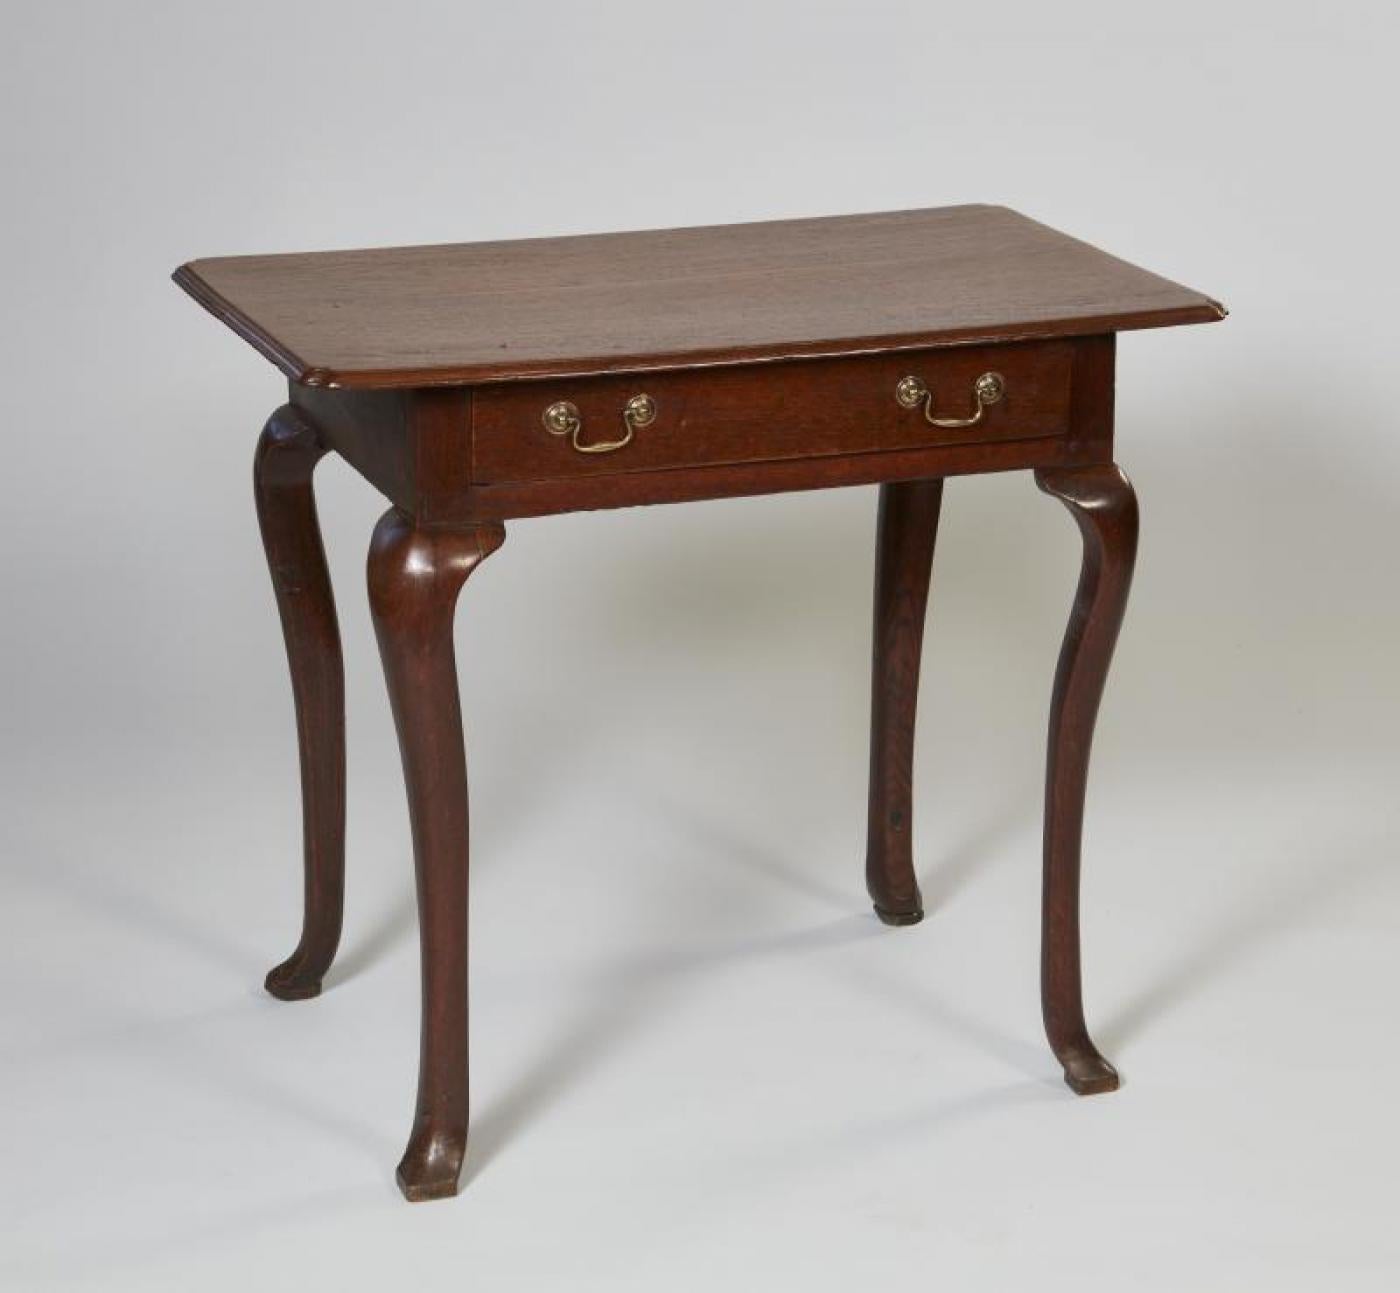 Early 18th century English oak padfoot side table, the quarter sawn oak top with molded edge and re-entrant corners over single drawer, the shaped cabriole legs ending in square pad feet, the whole with good mellow color and patina.